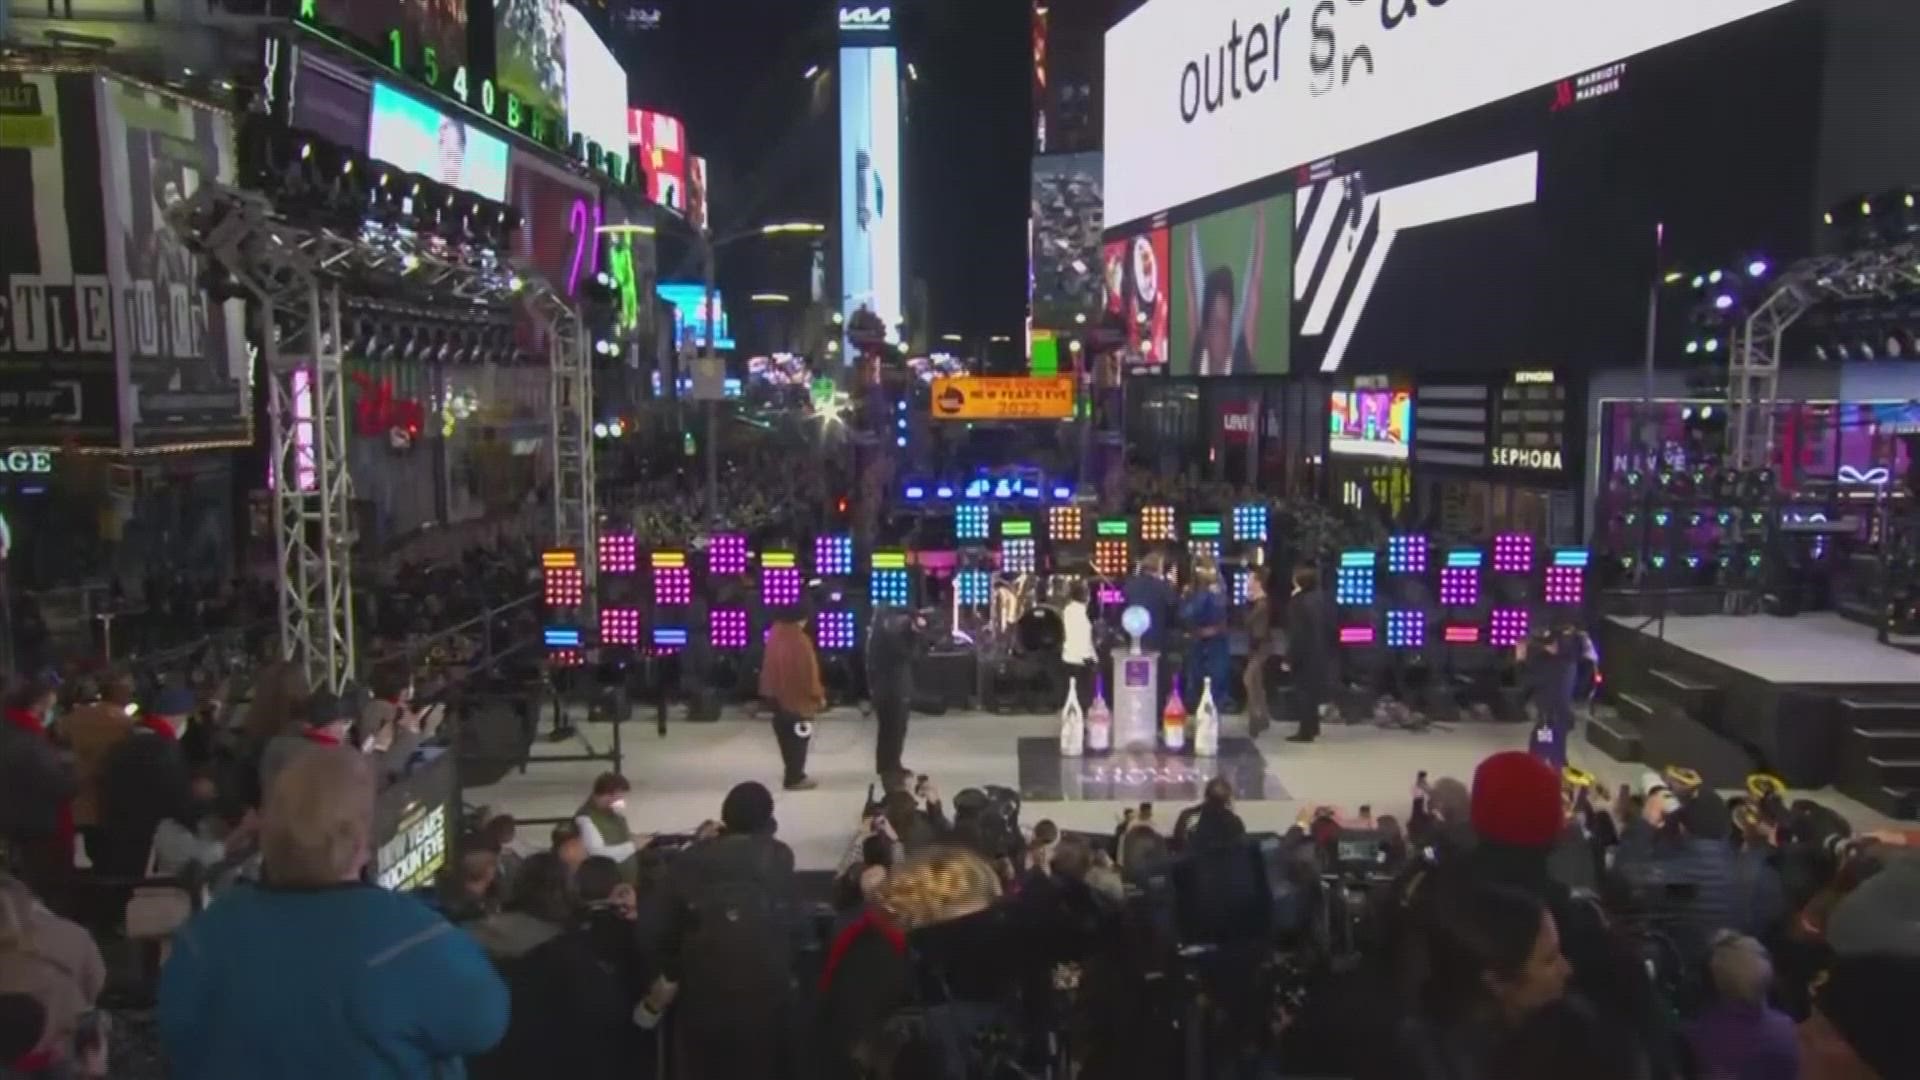 New York City performed its traditional ball drop in Times Square to welcome 2022.